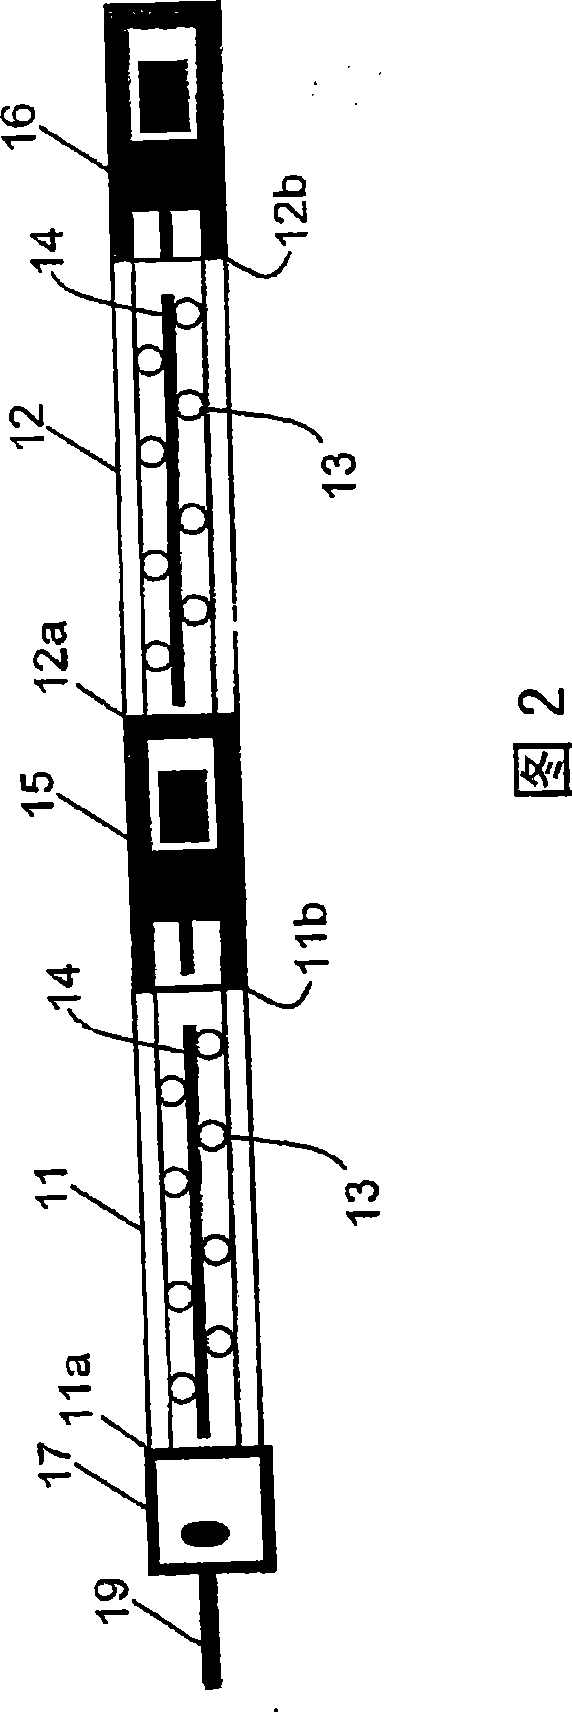 Apparatus string for use in a wellbore